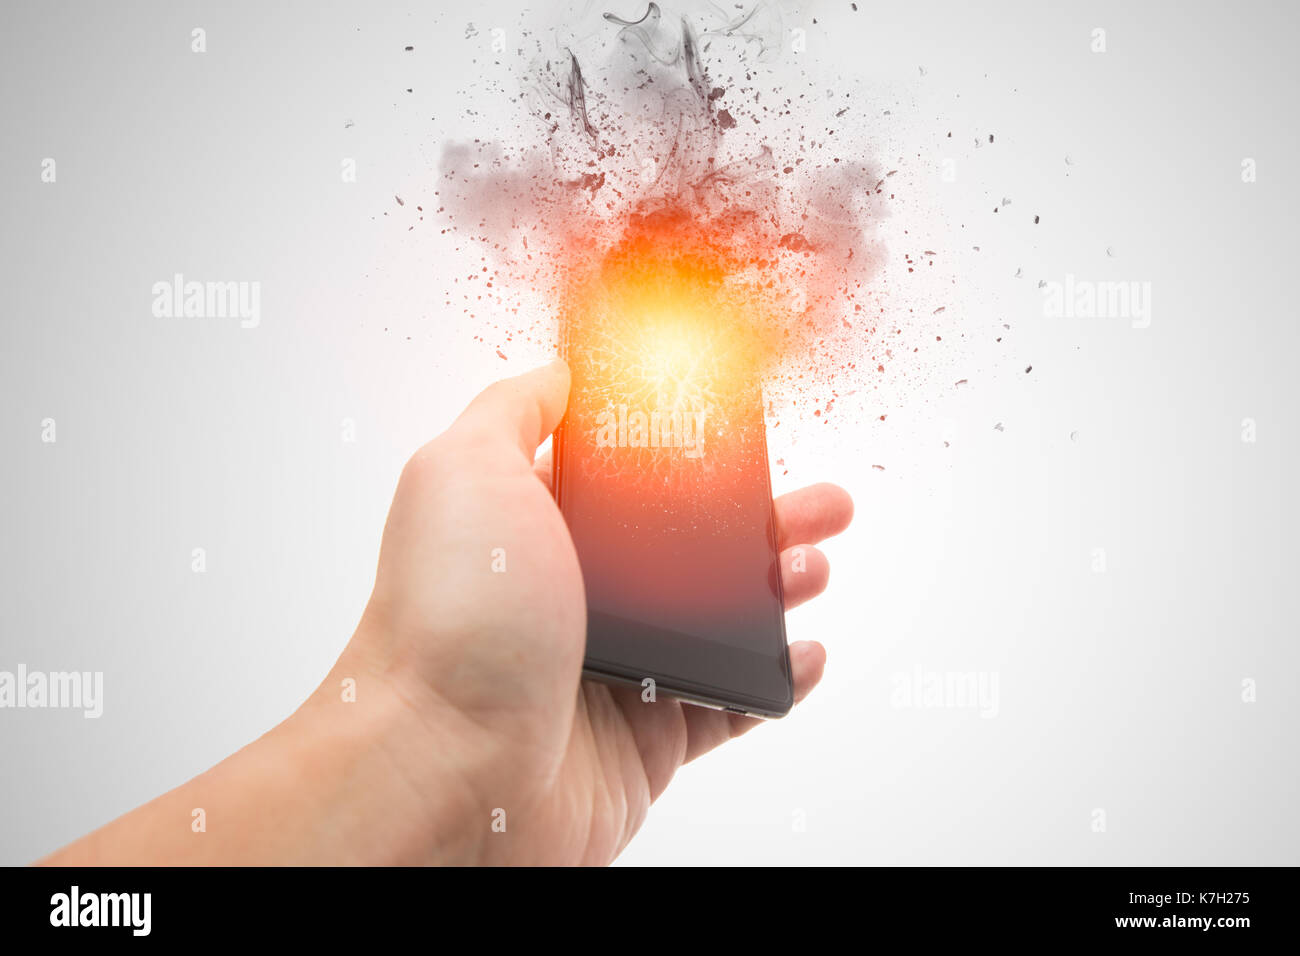 smartphone explosion, blow up cellphone battery or explosive mobile phone or explode burst fire burn out smart device with dispersion effect. Stock Photo